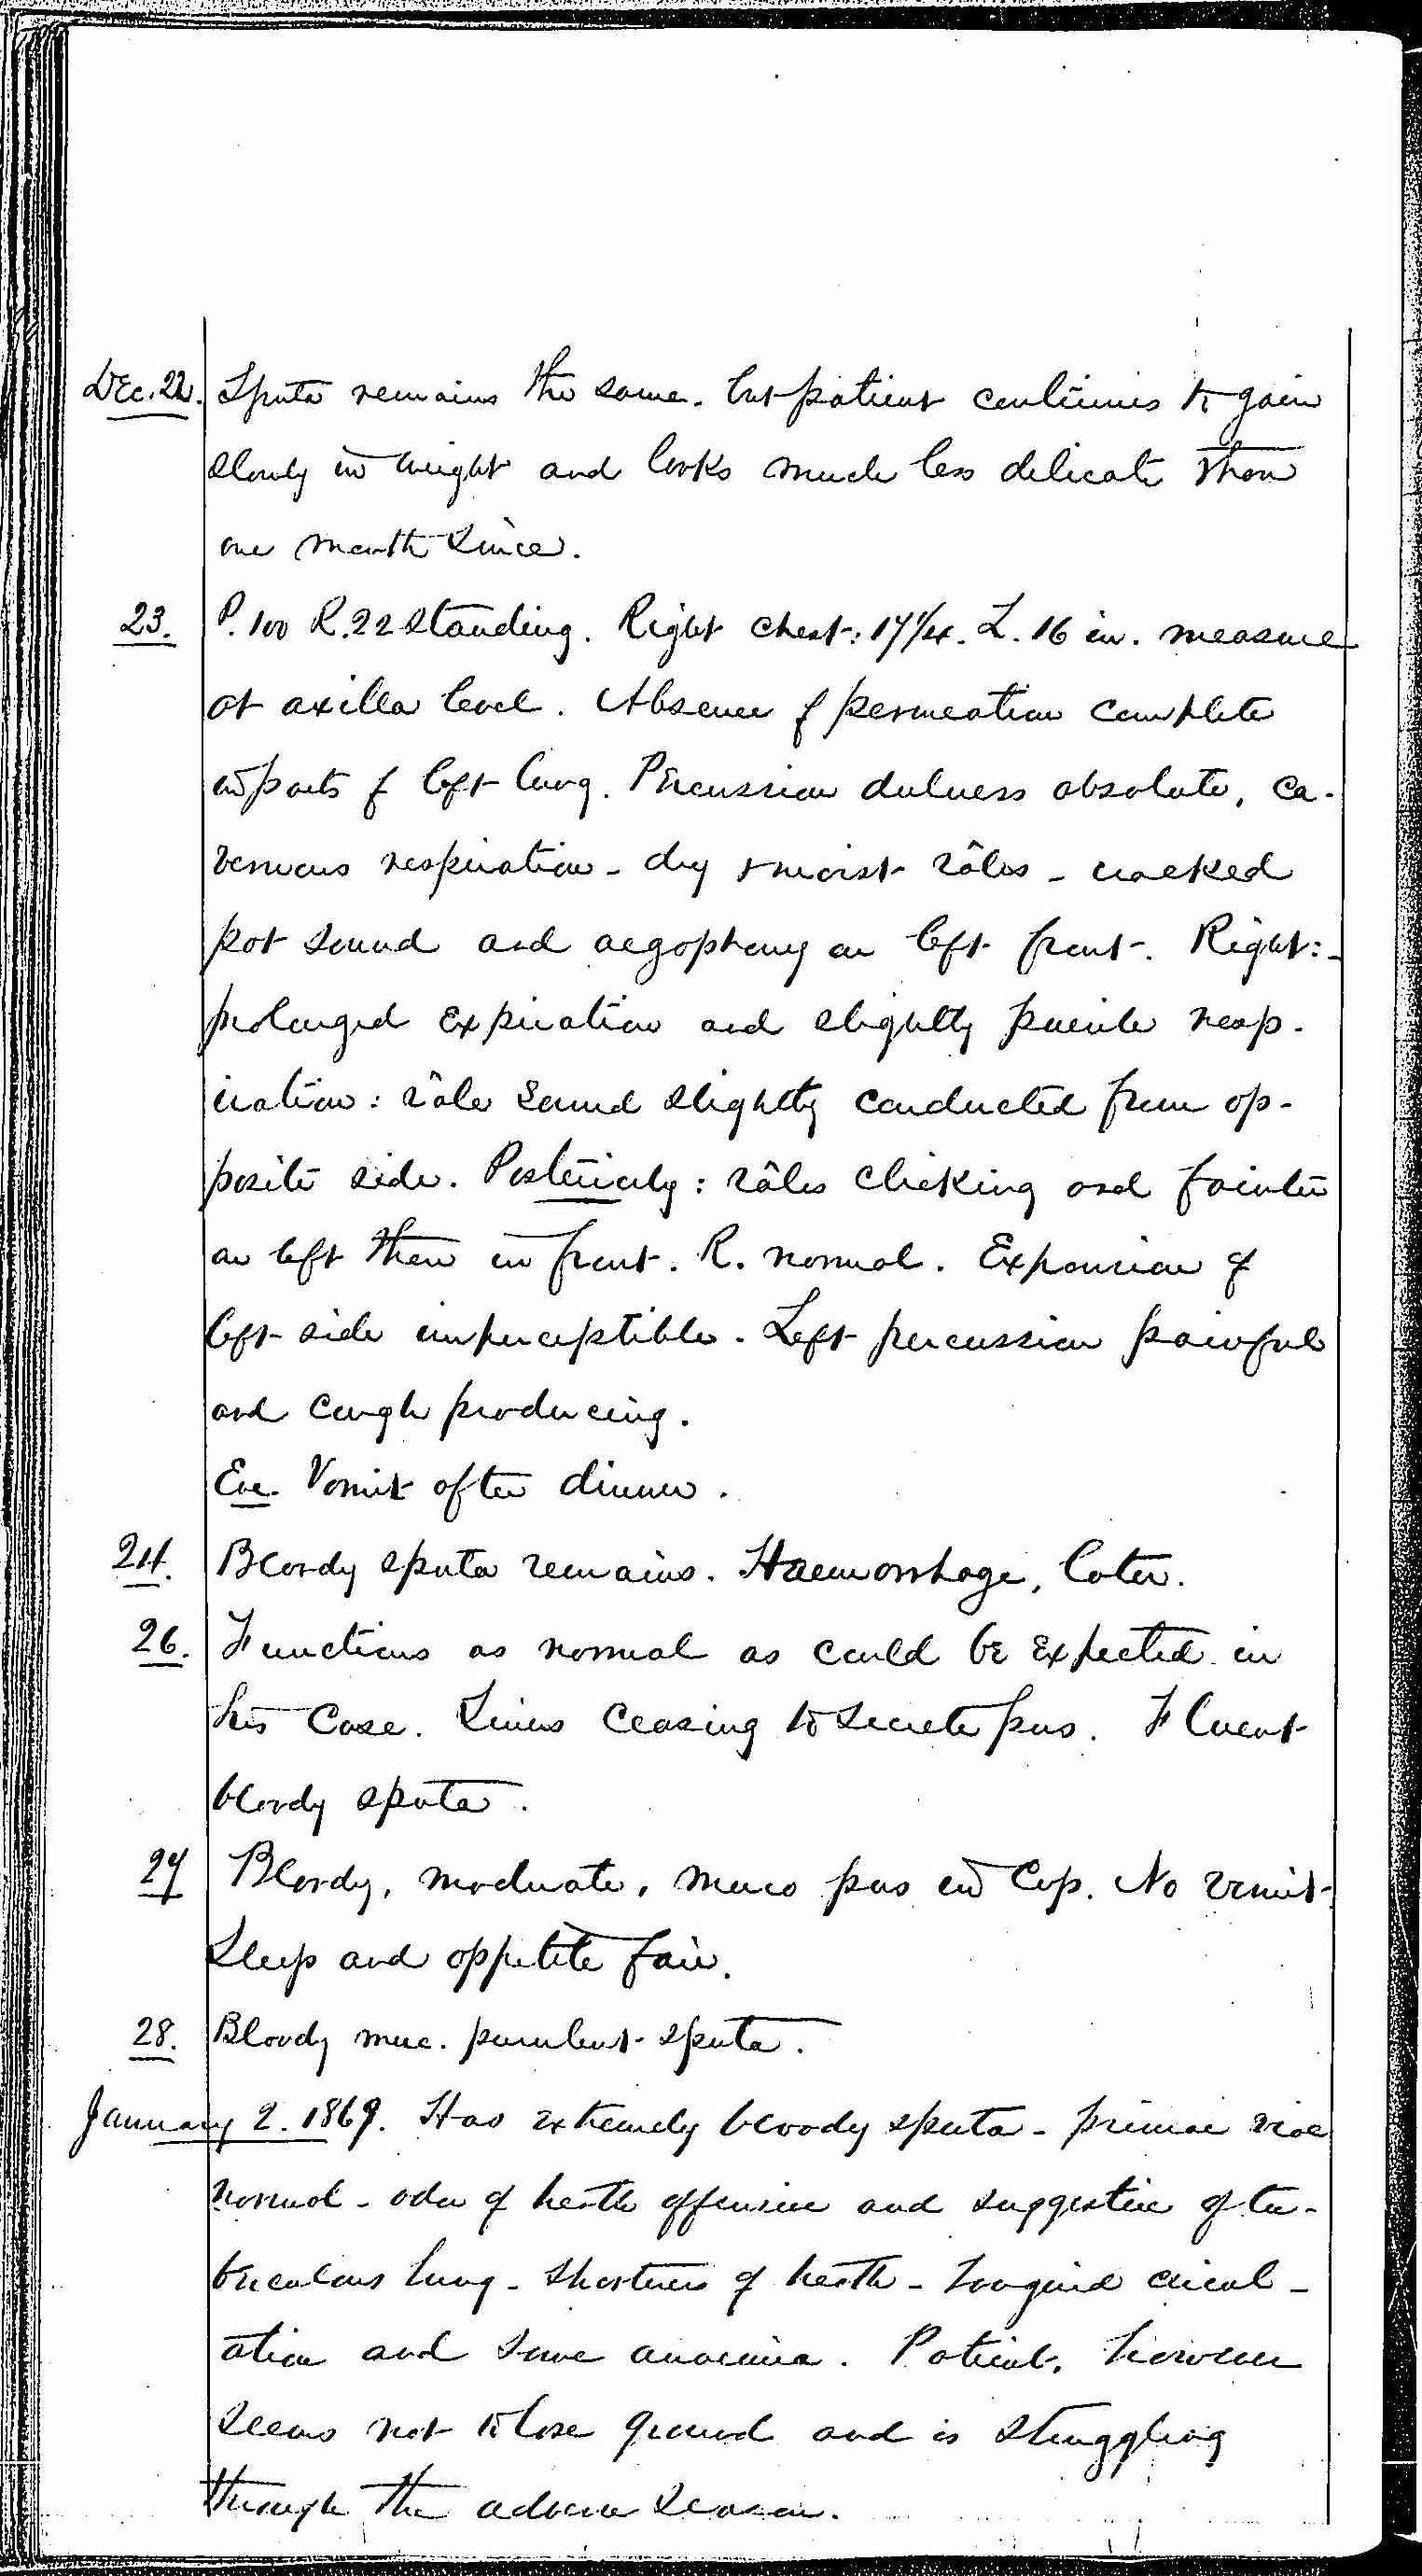 Entry for Bernard Drury (page 22 of 31) in the log Hospital Tickets and Case Papers - Naval Hospital - Washington, D.C. - 1868-69